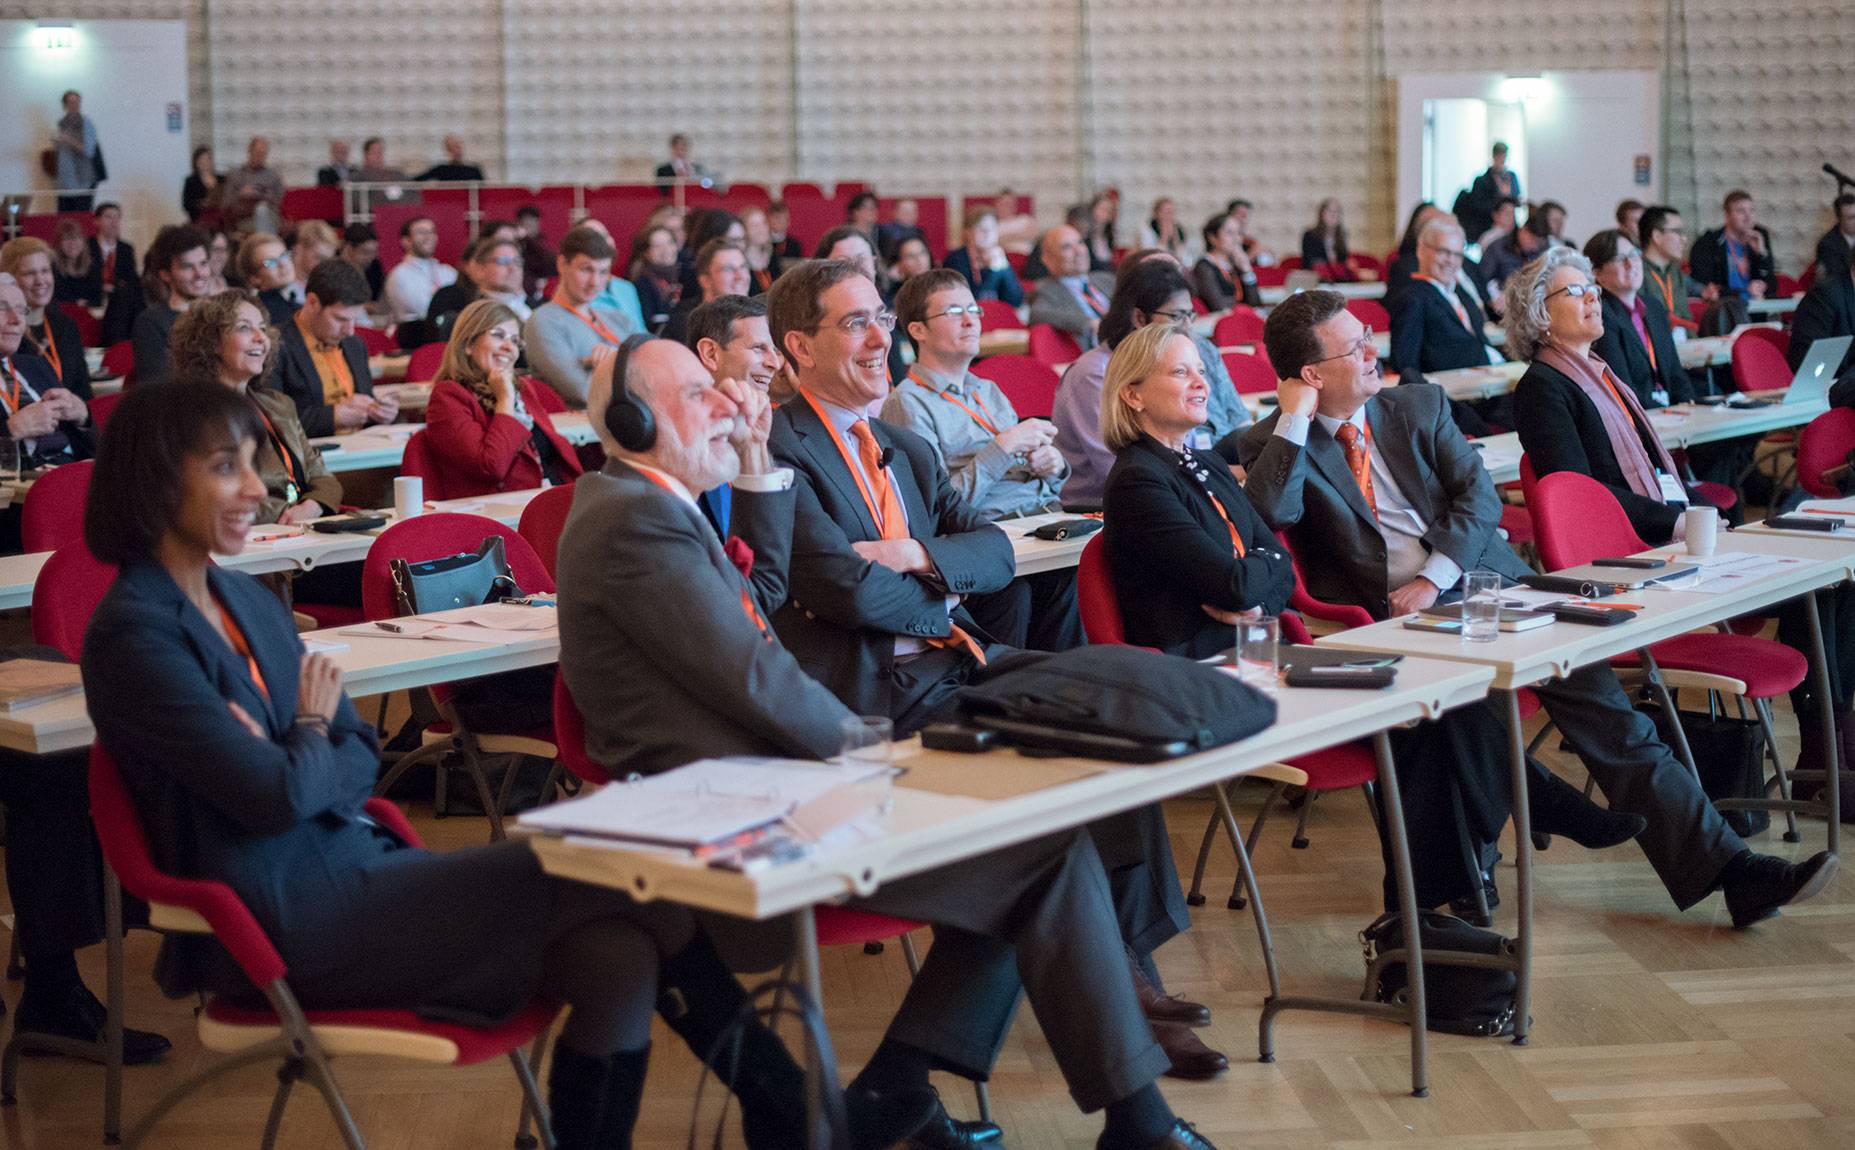 Attendees listening to panel at the Princeton-Fung Global Forum in Berlin